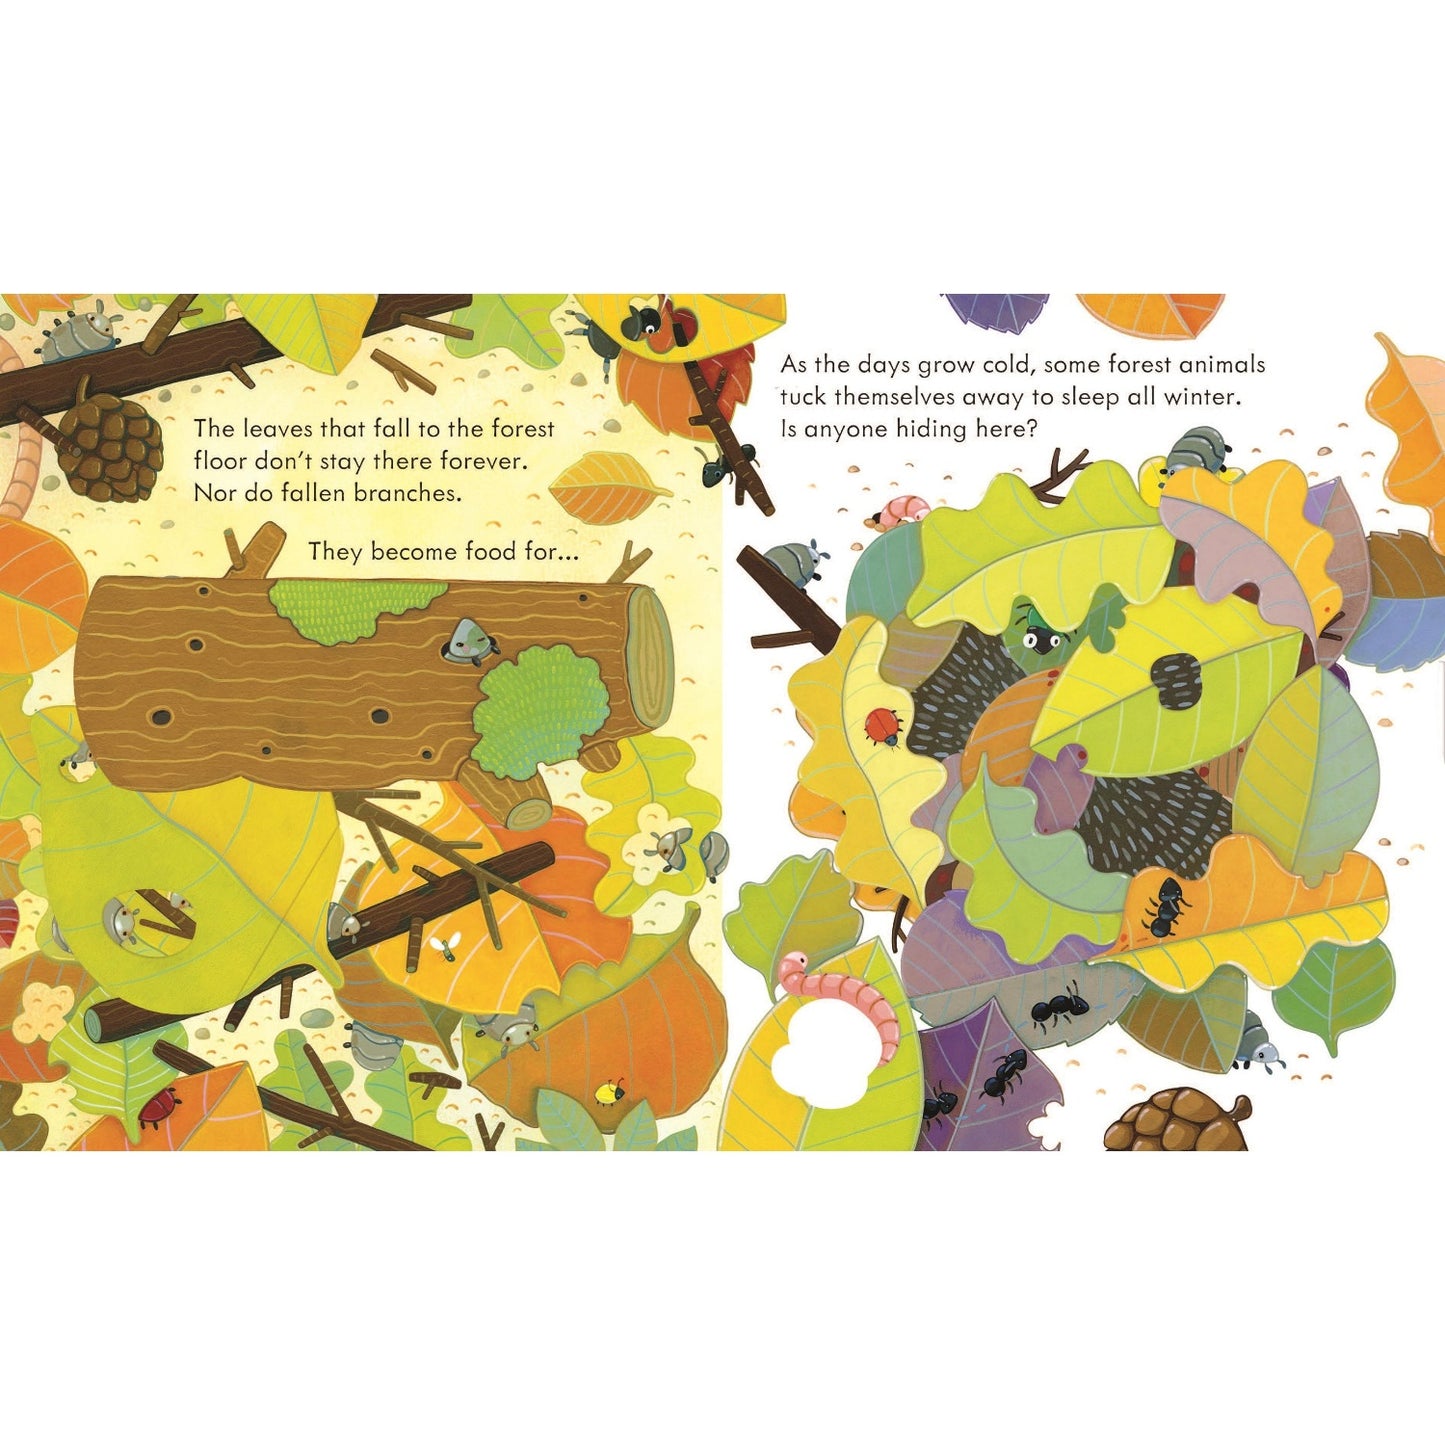 Peep Inside a Forest | Children's Book on Nature